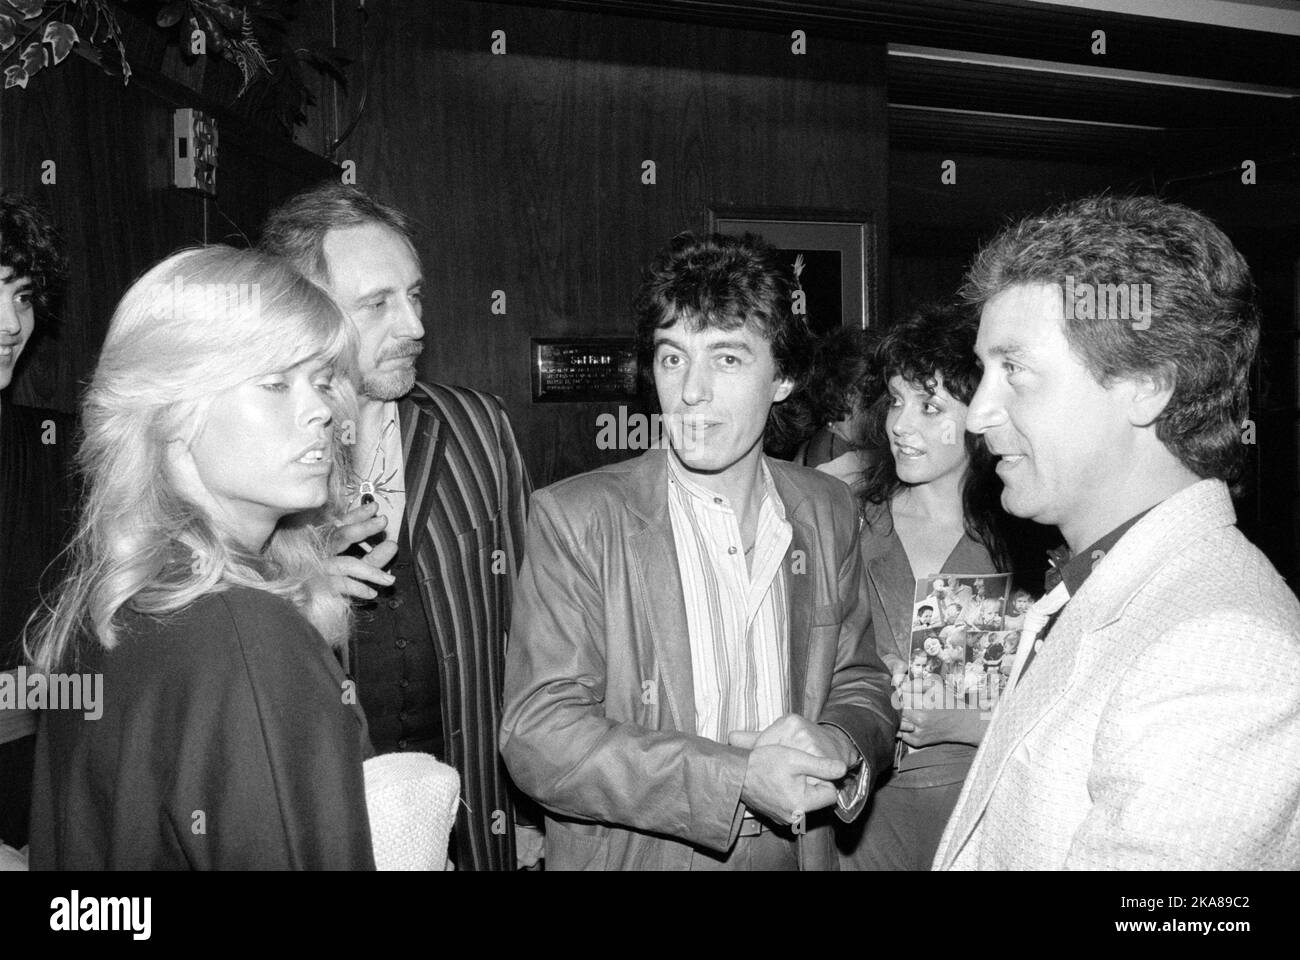 84-1096 BILL WYMAN, MANDY SMITH, JOHN ENTWISTLE, KENNY JONES & OTHERS 29 May 1984 The Prince Of Wales Theatre, Coventry Street, London Stock Photo